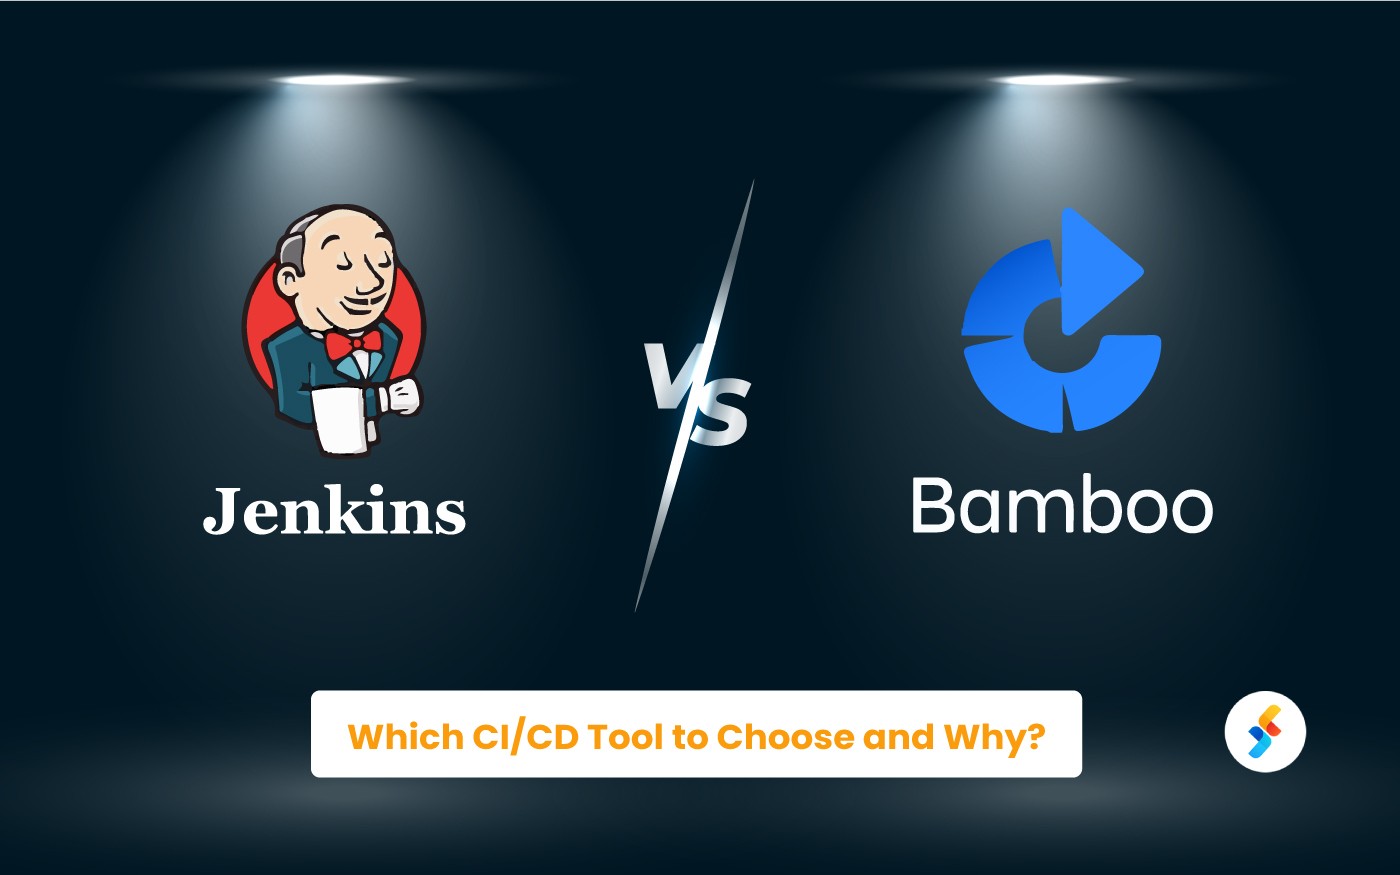 Bamboo vs. Jenkins: Which CI/CD Tool to Choose and Why?